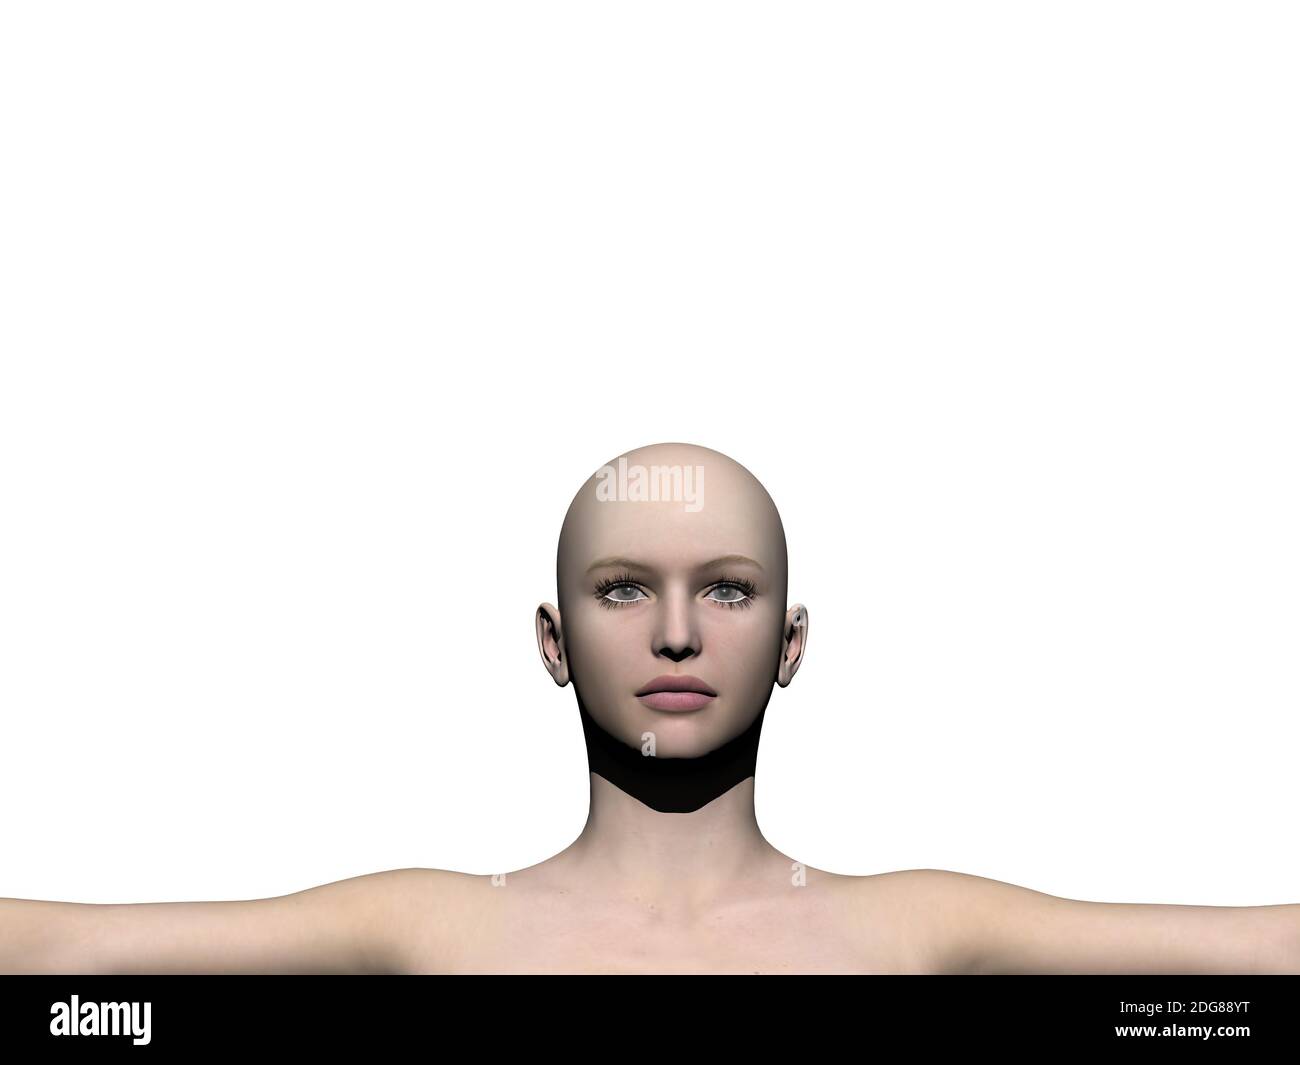 350,936 Woman Face Profile Images, Stock Photos, 3D objects